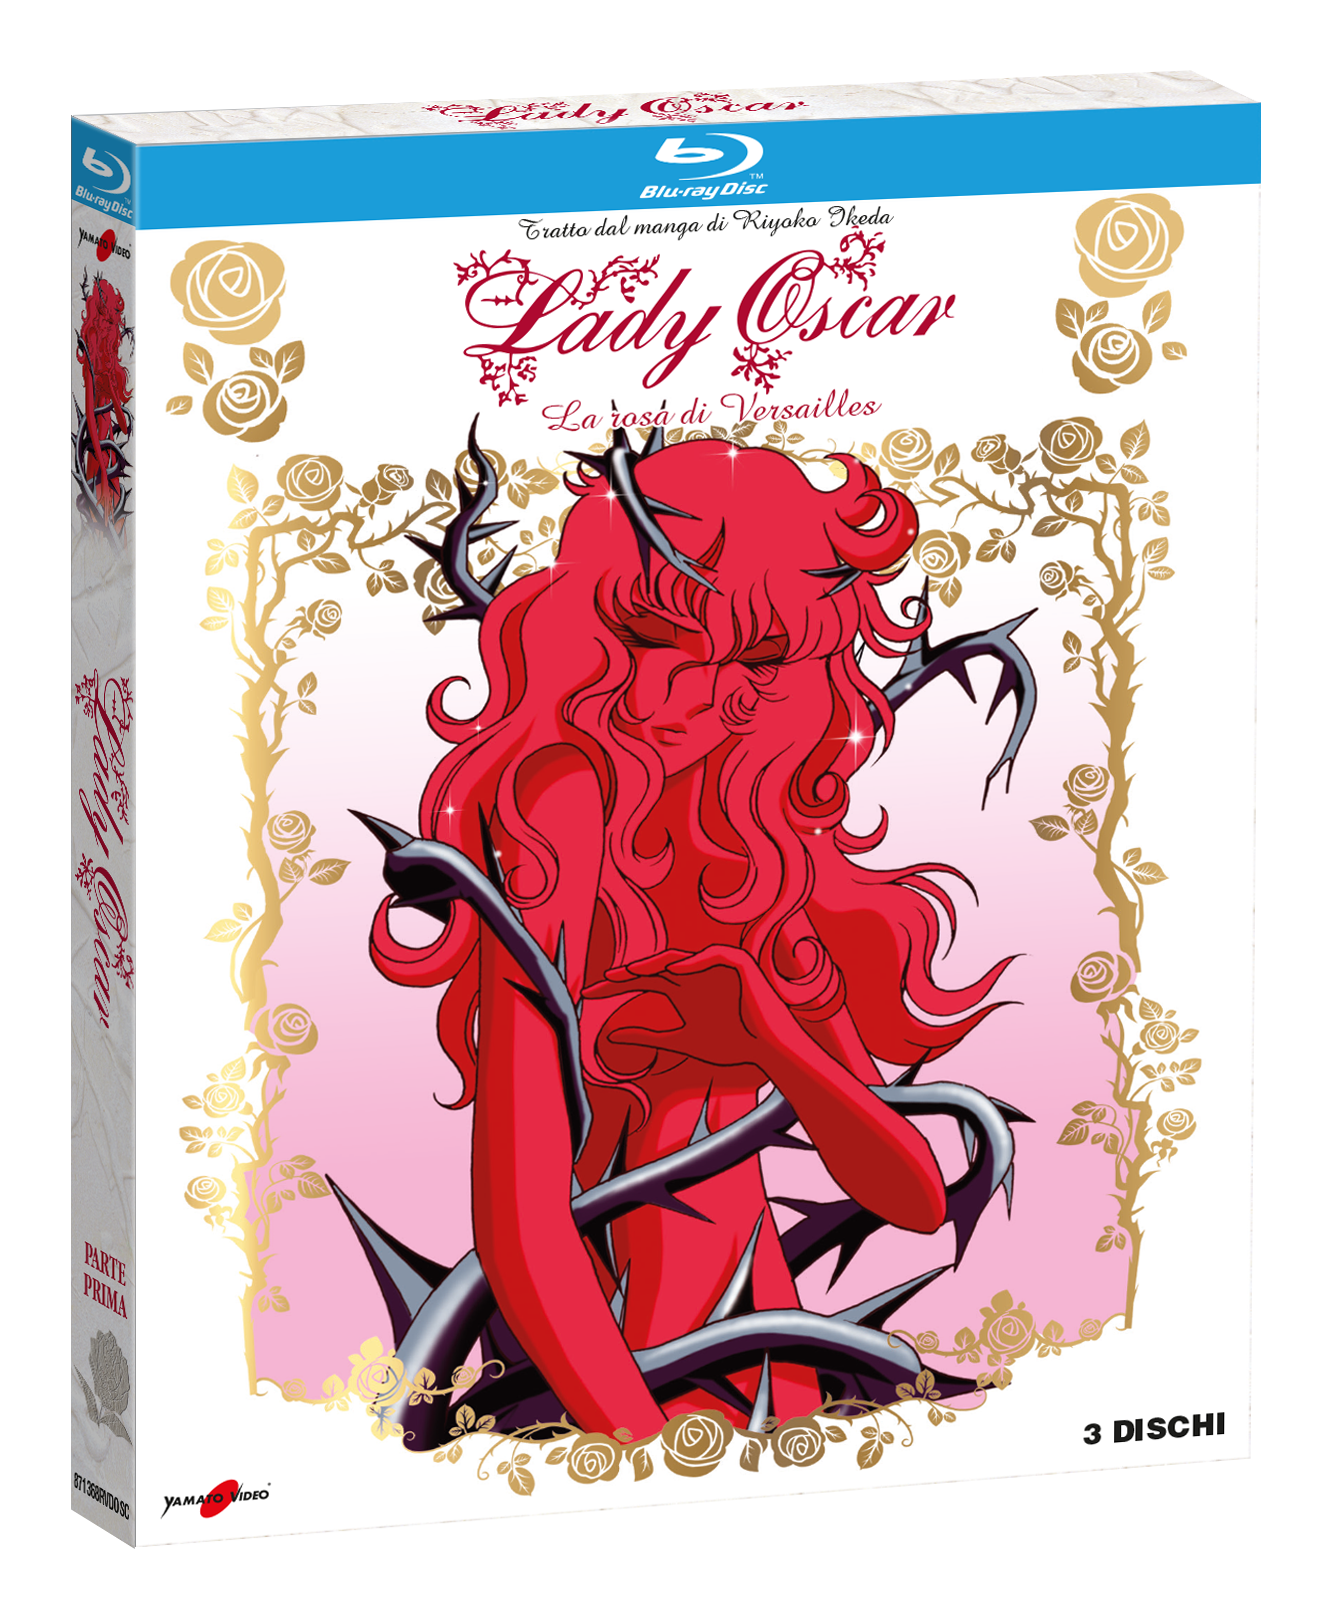 The LADY OSCAR box set arrives on Home Video from May 29th